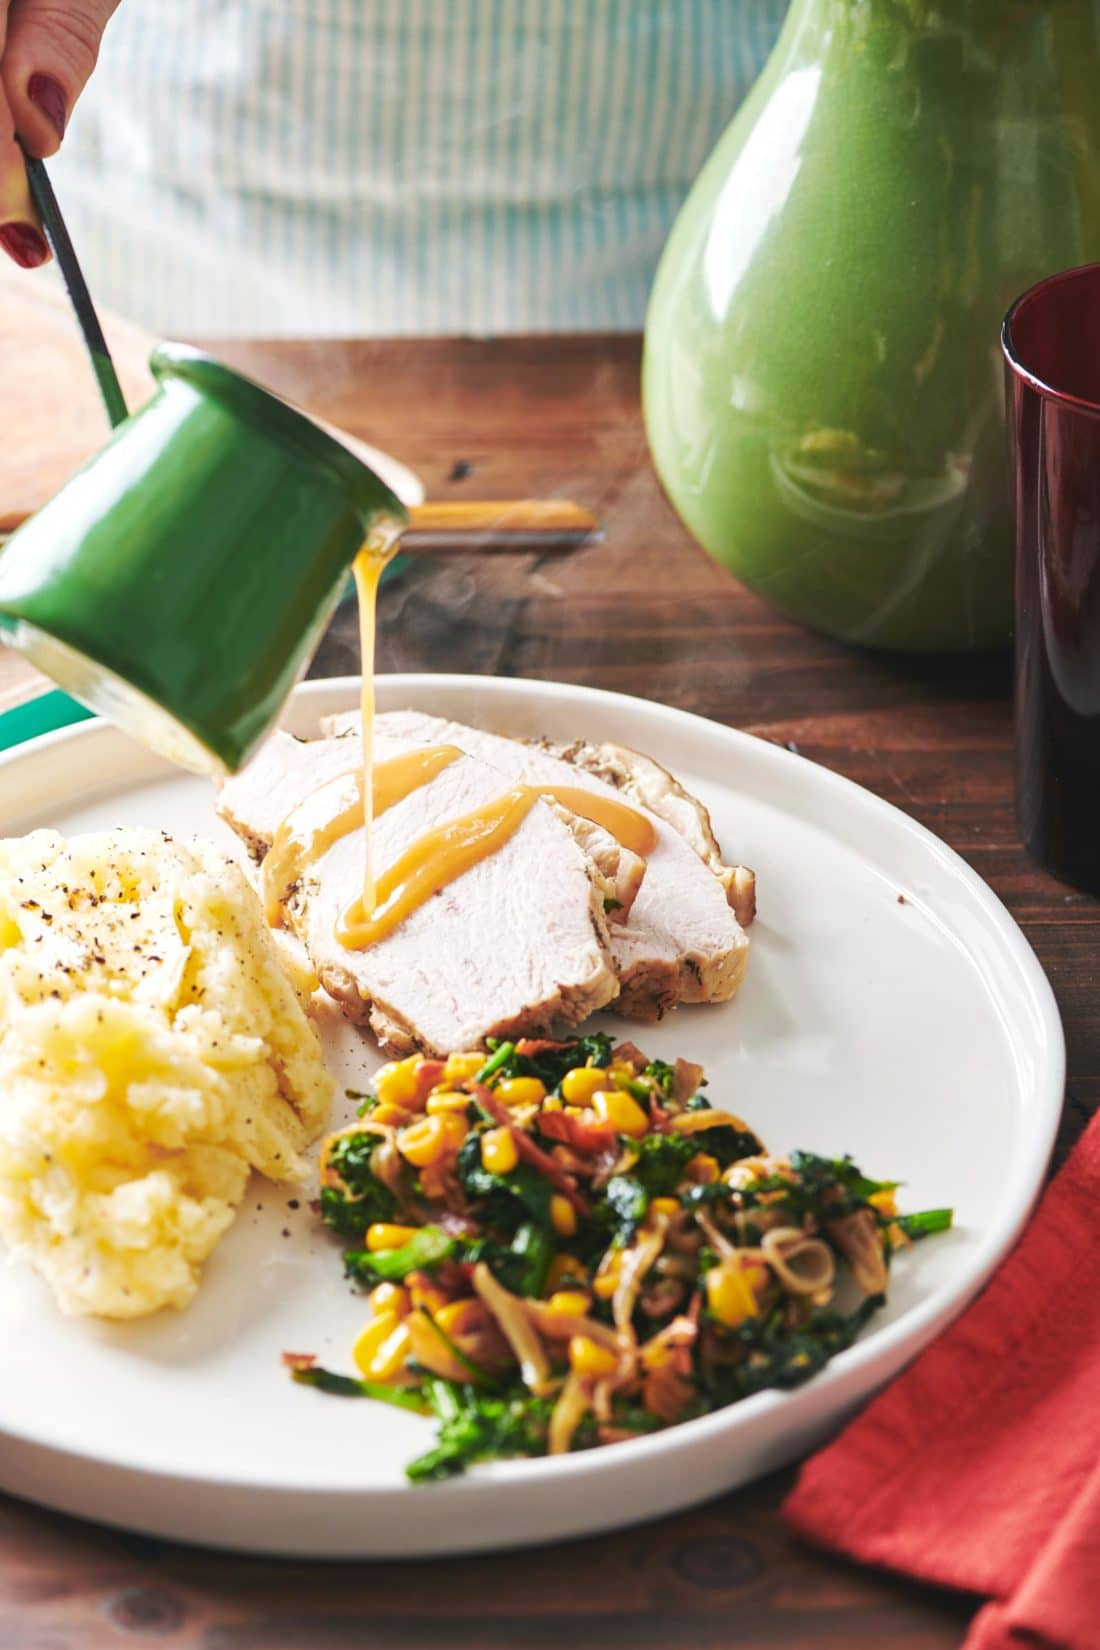 Green cup pouring gravy onto slices of Turkey Breast plated with mashed potatoes and vegetables.